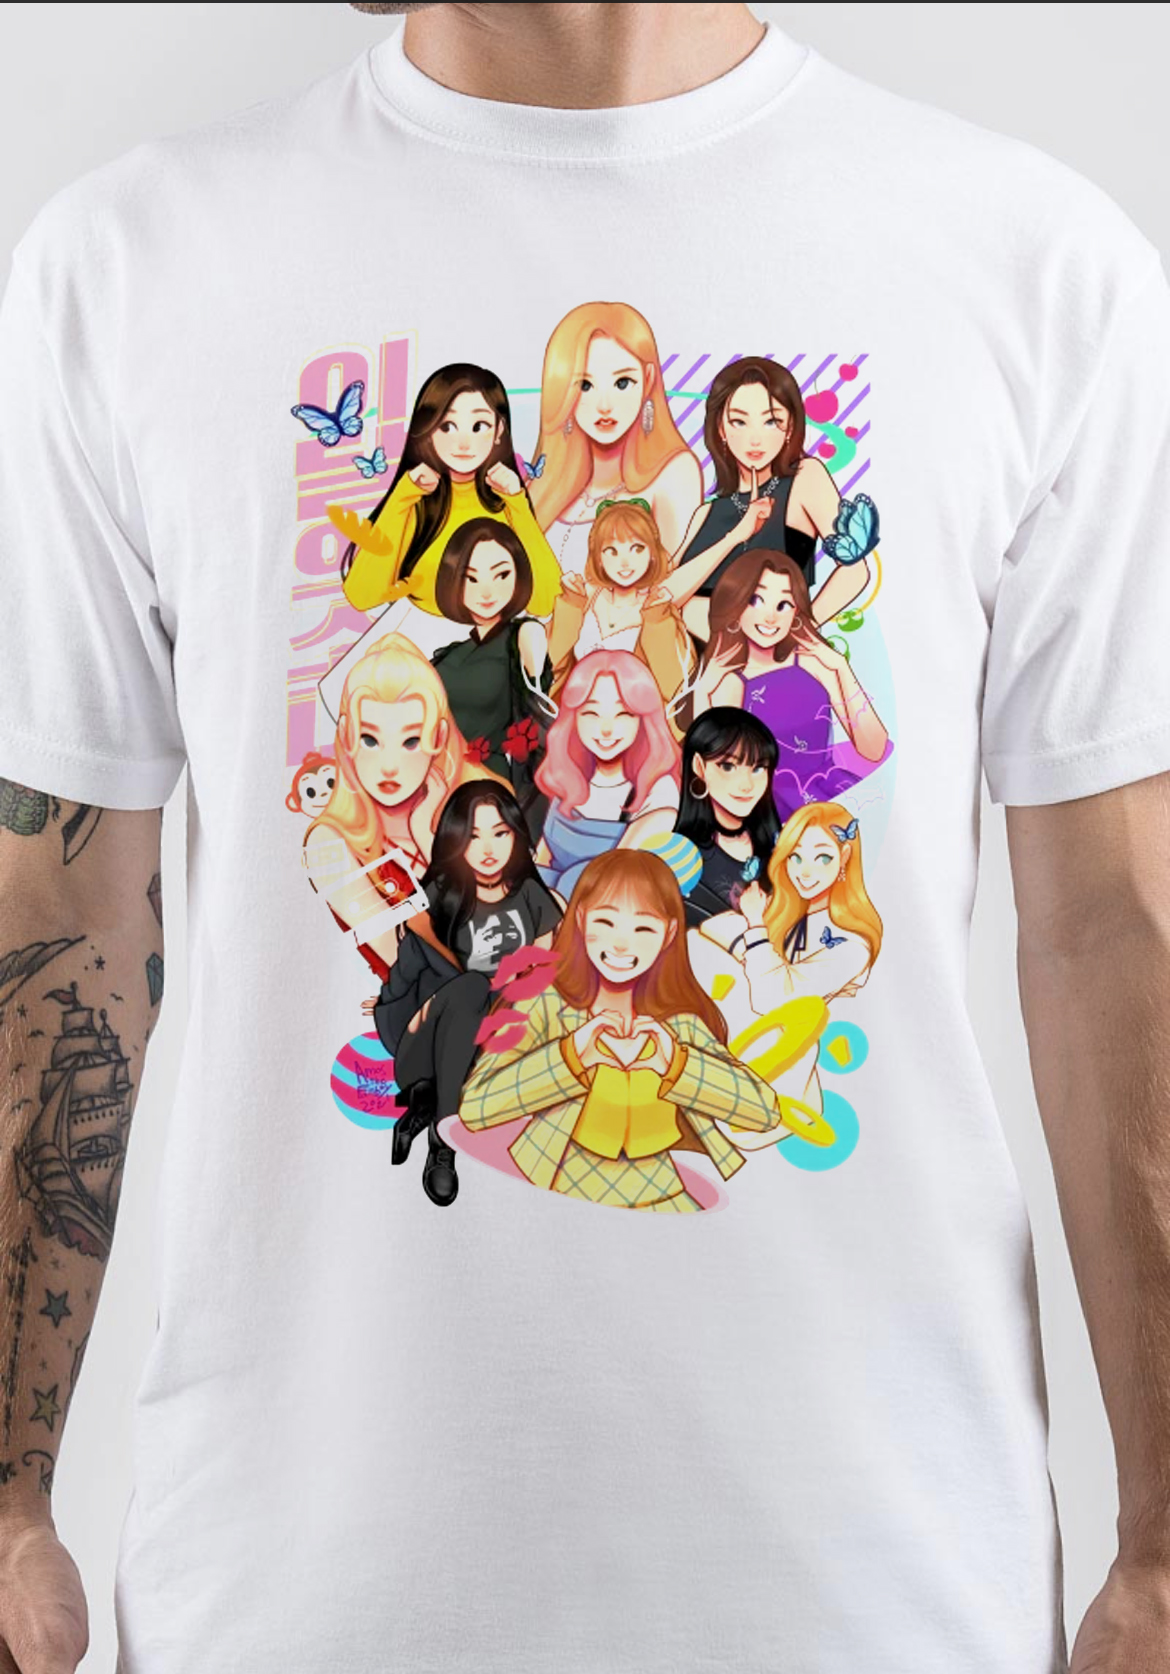 Loona T-Shirt And Merchandise